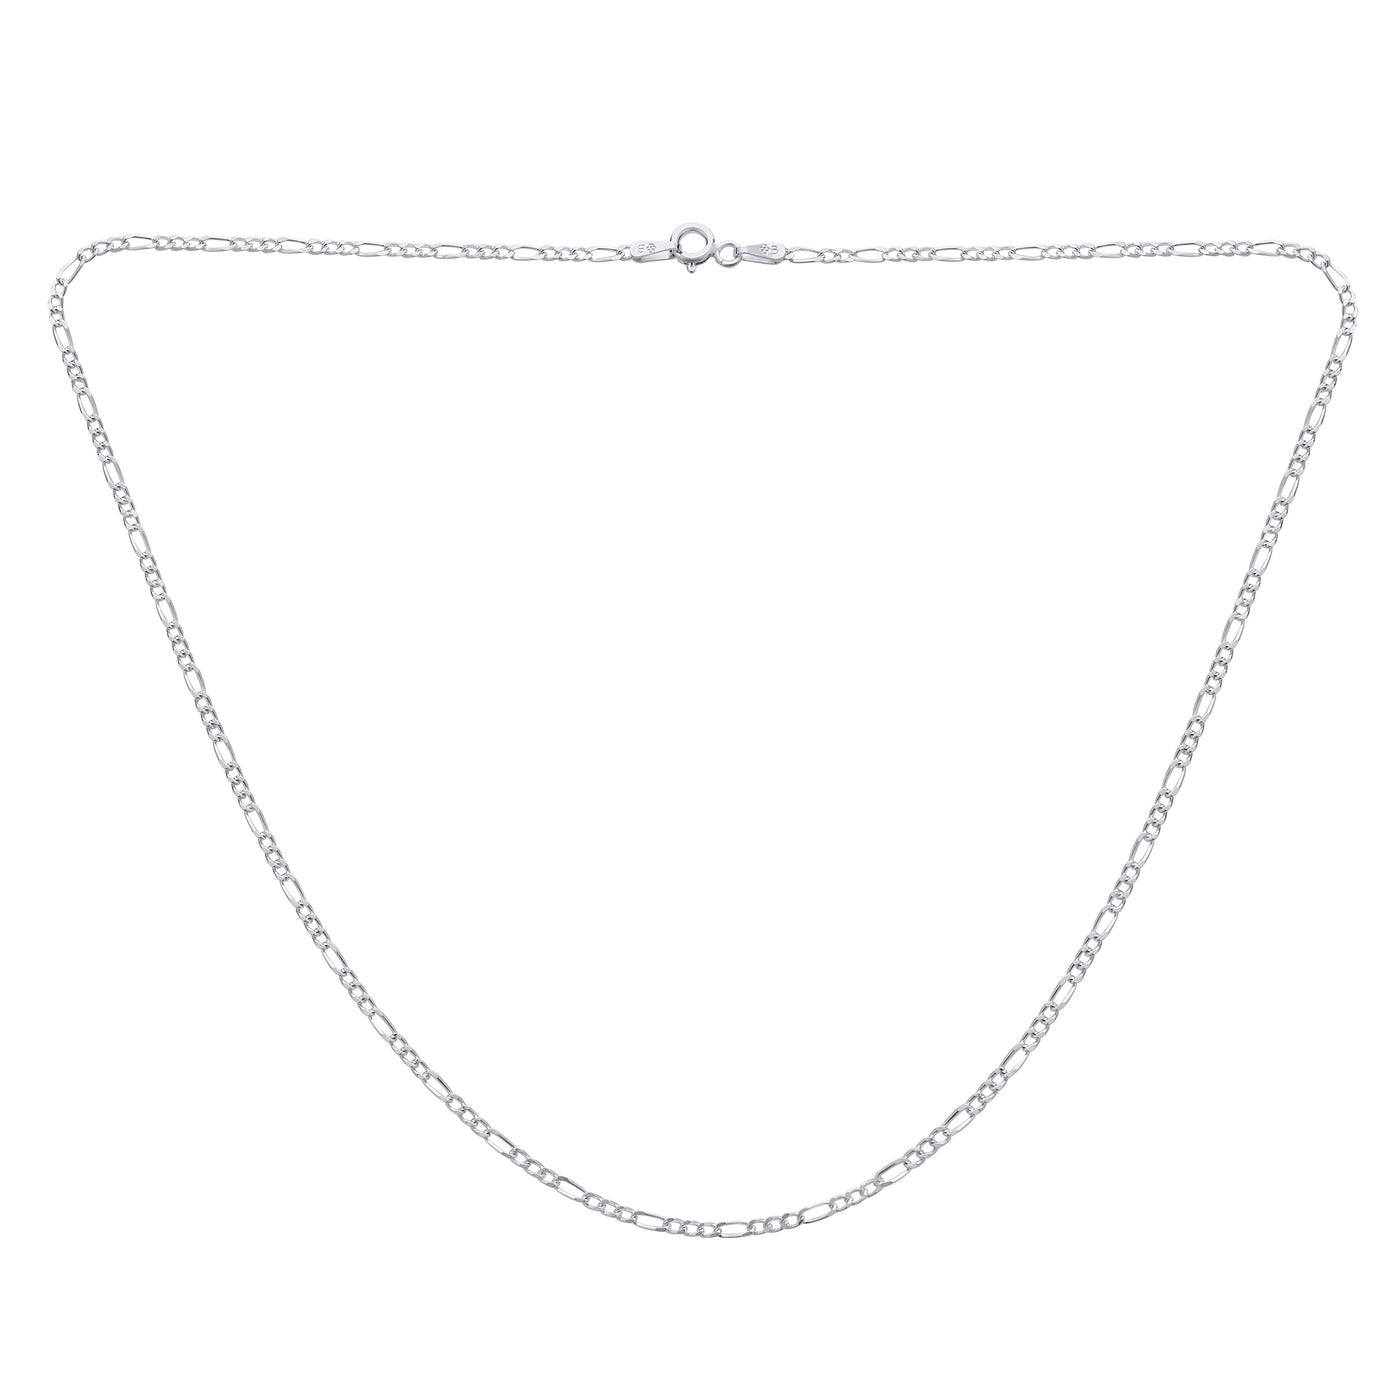 Thin 50 Gauge 1.5 MM .925 Sterling Silver Figaro Chain Necklace